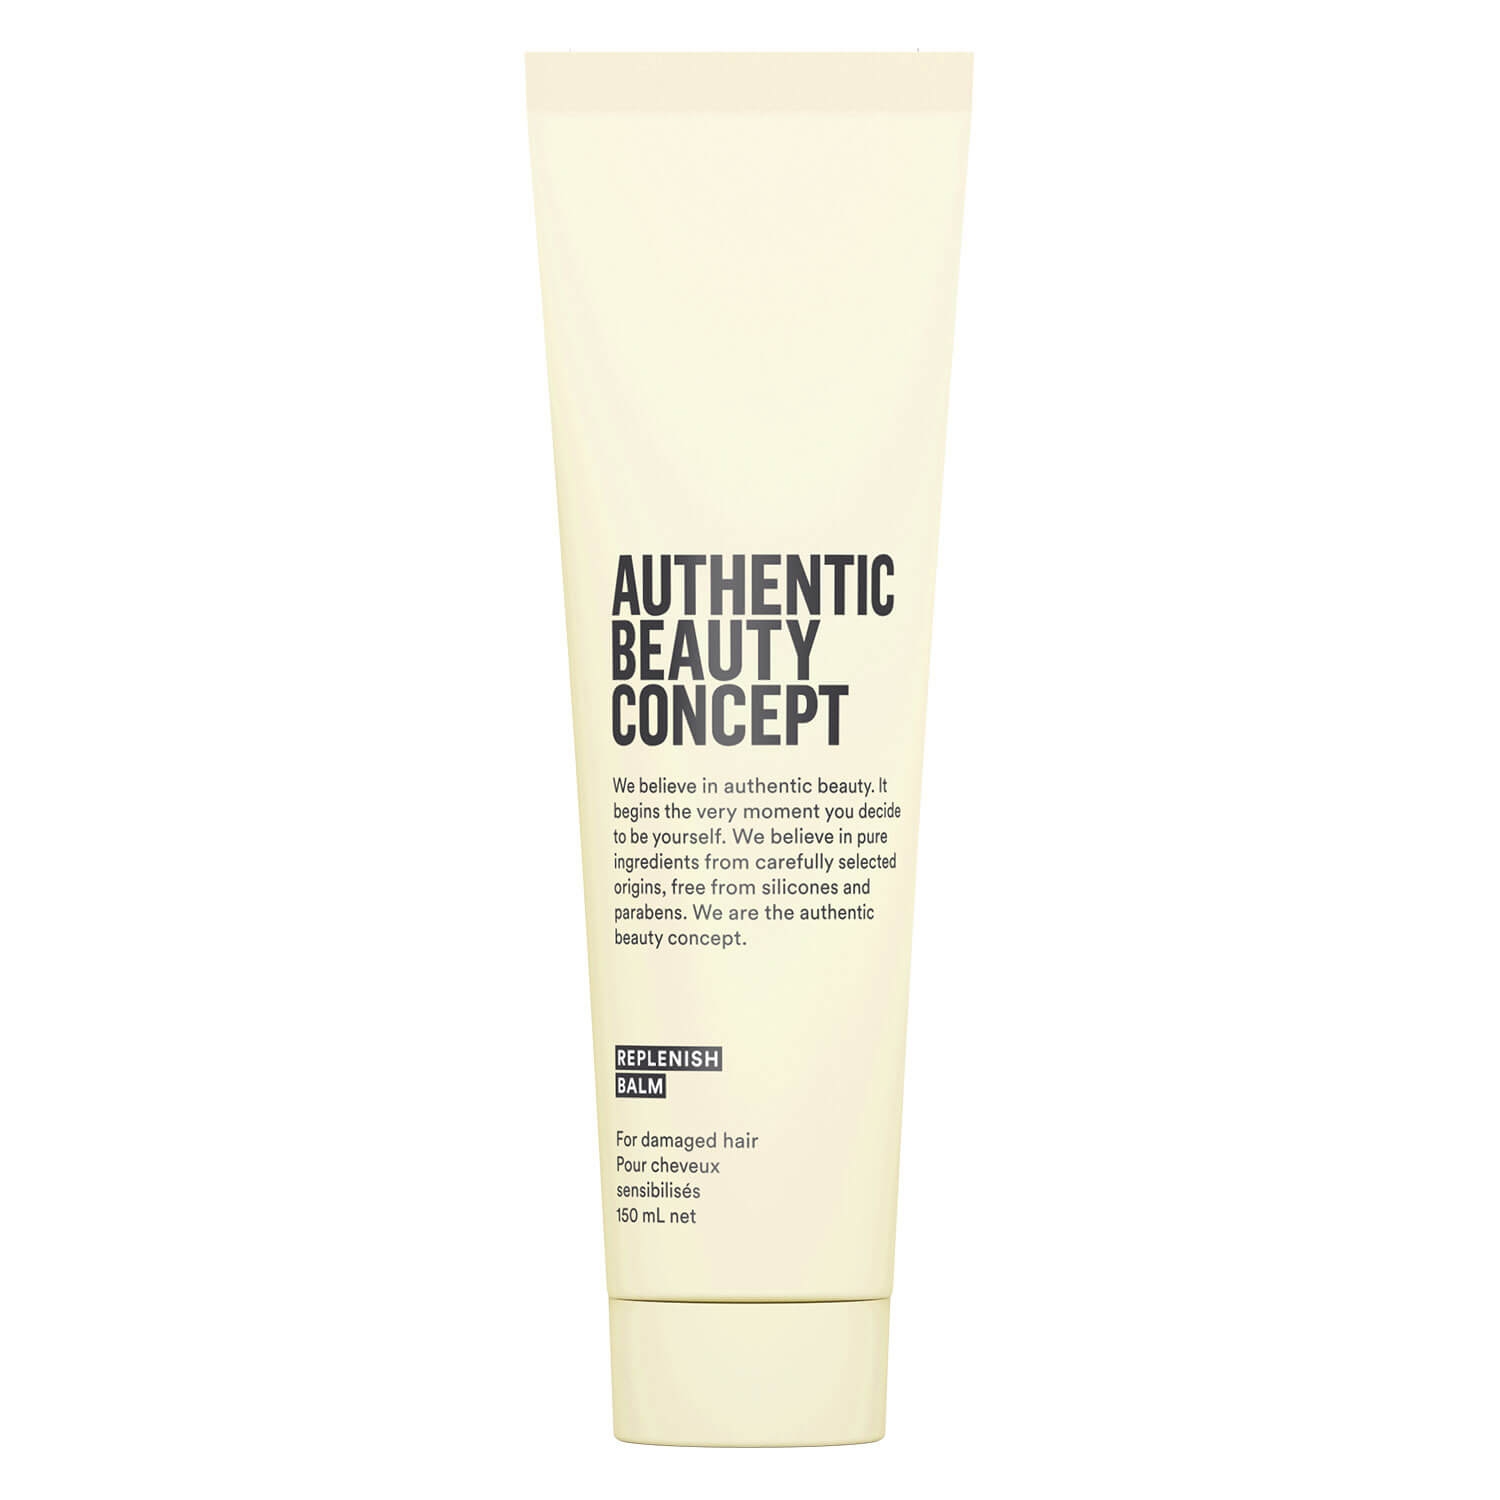 Product image from ABC Replenish - Balm